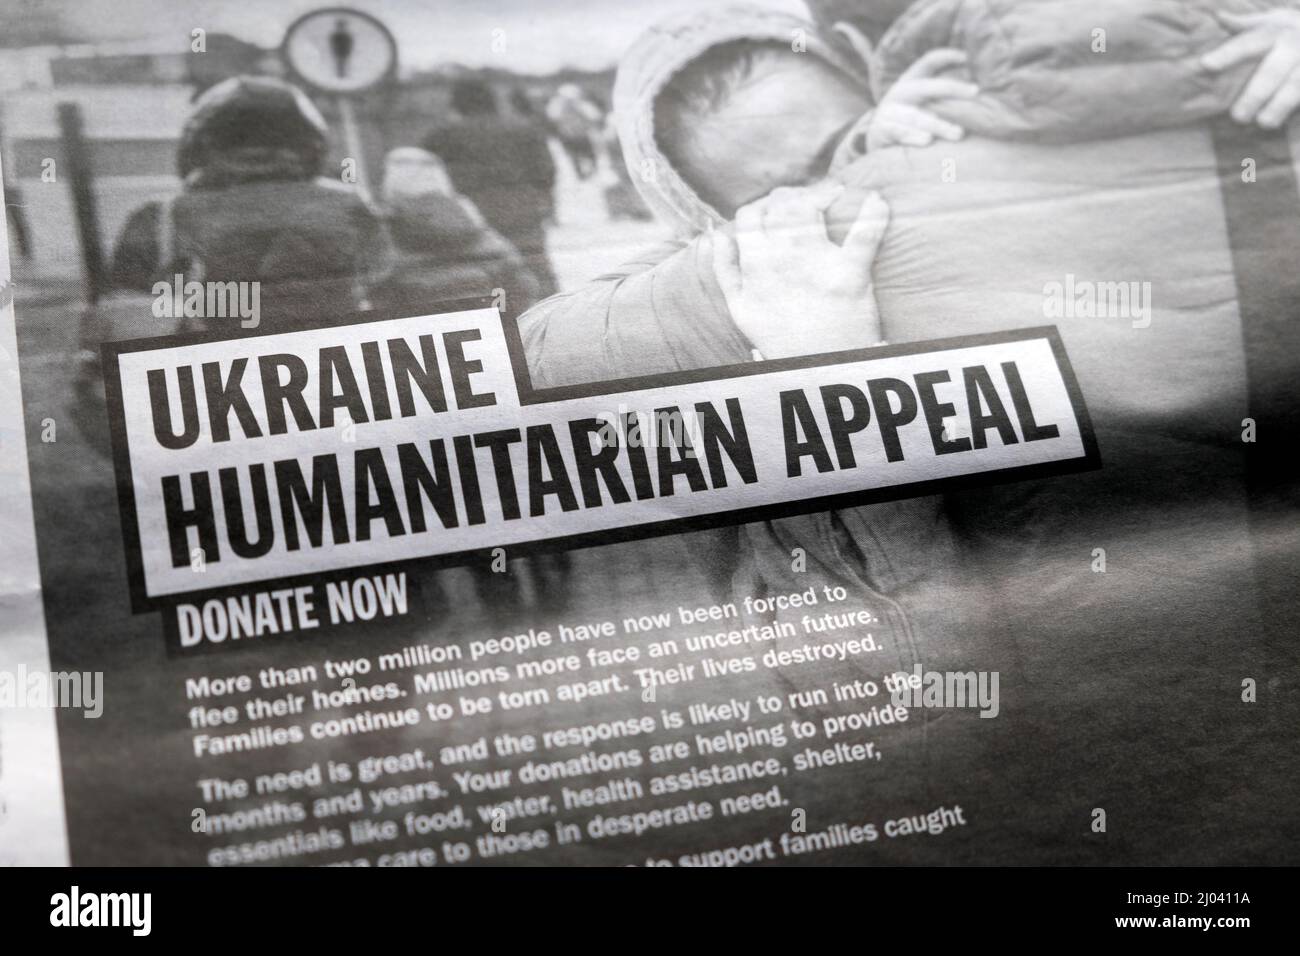 Ukraine Humanitarian Appeal newspaper advert advertisement for donations to help people refugees fleeing Russian invasion March 2022 London England UK Stock Photo